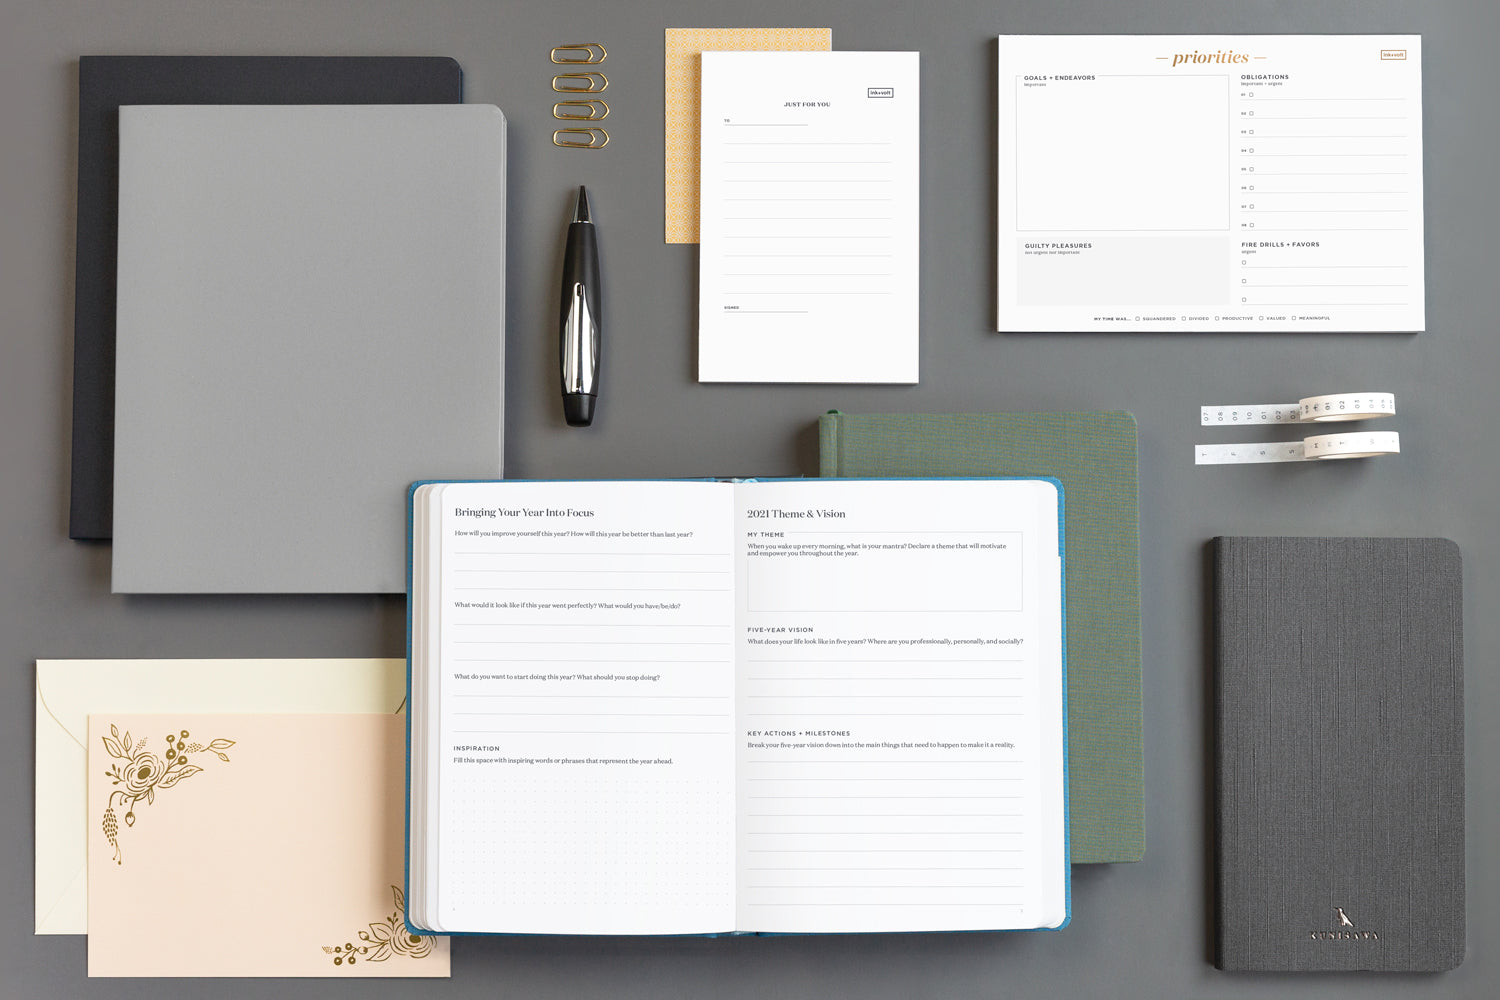 A busy array of productivity tools to help with work-life balance - notepads, notebooks, a planner, pens, washi tape, and stationery.